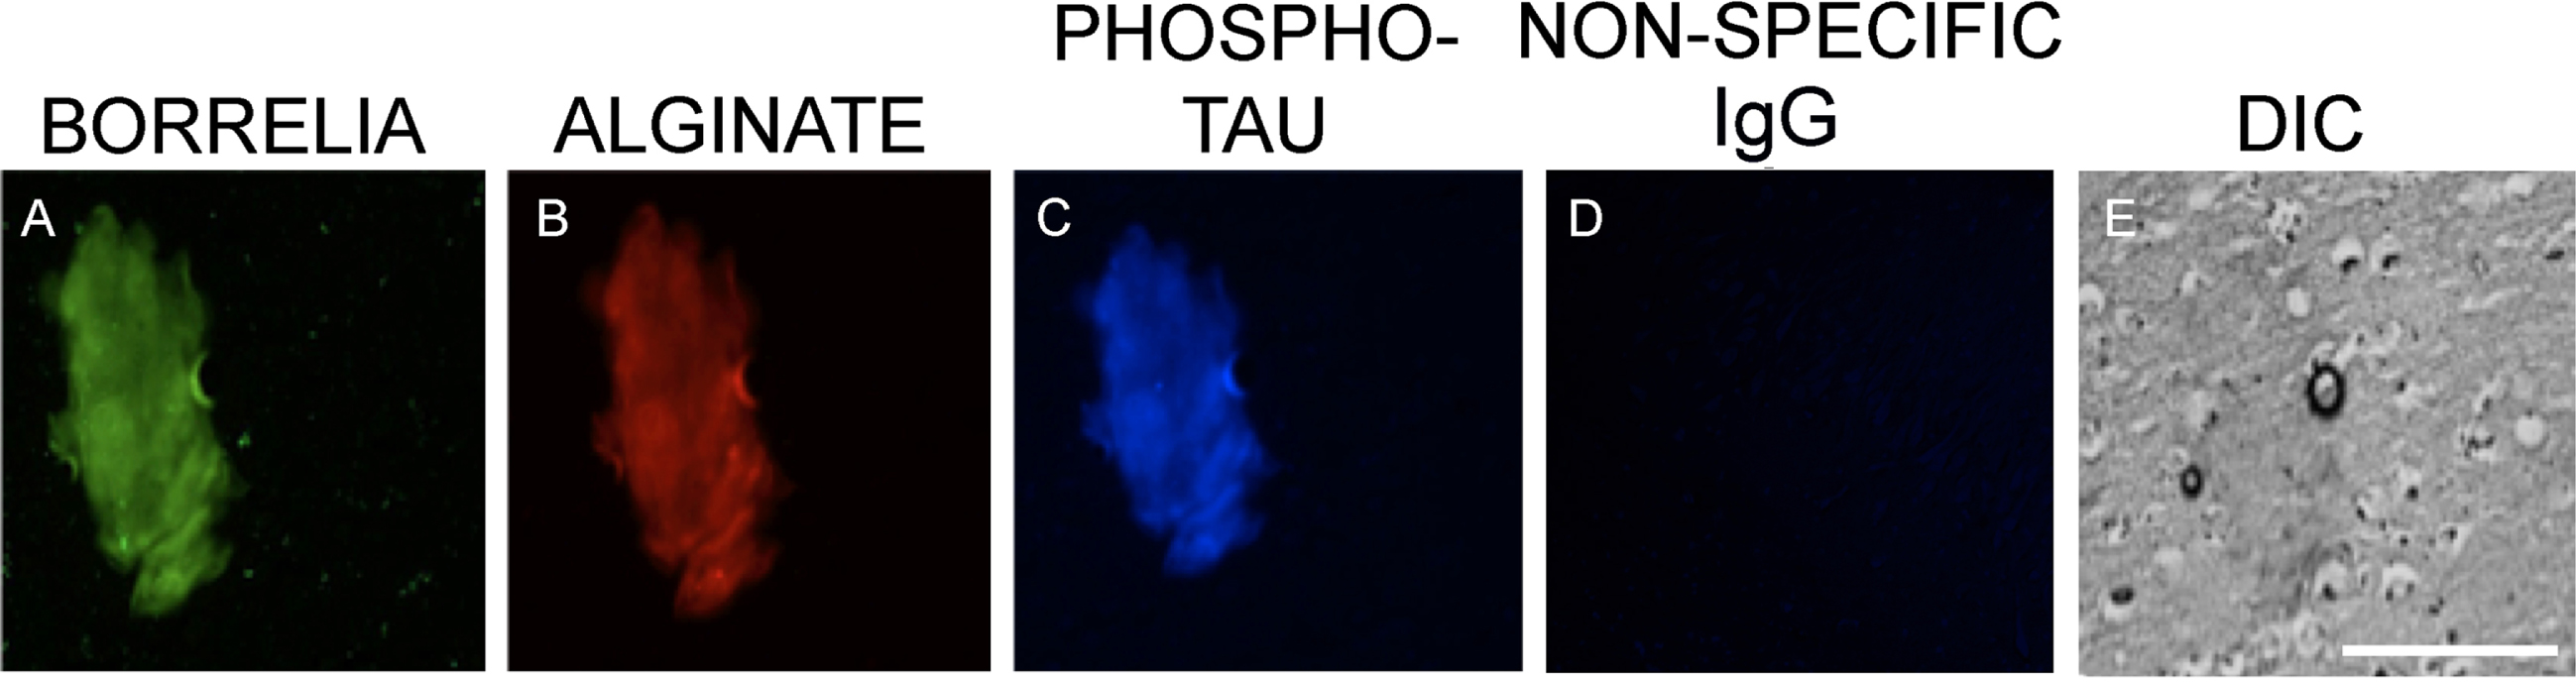 Representative images of a B. burgdorferi positive aggregate with phospho-tau co-localization in human brain tissue sections. Panel A shows IHC staining results for infected brain tissue using a FITC labeled anti-Borrelia antibody (green). Panel B shows results using anti-alginate antibody (red). Panel C shows staining with anti-phospho-tau antibody (blue). Panel D demonstrates non-specific IgG negative control and Panel E shows tissue morphology with DIC microscopy. All images were taken at 400x. The scale bar shows 200 micrometers.